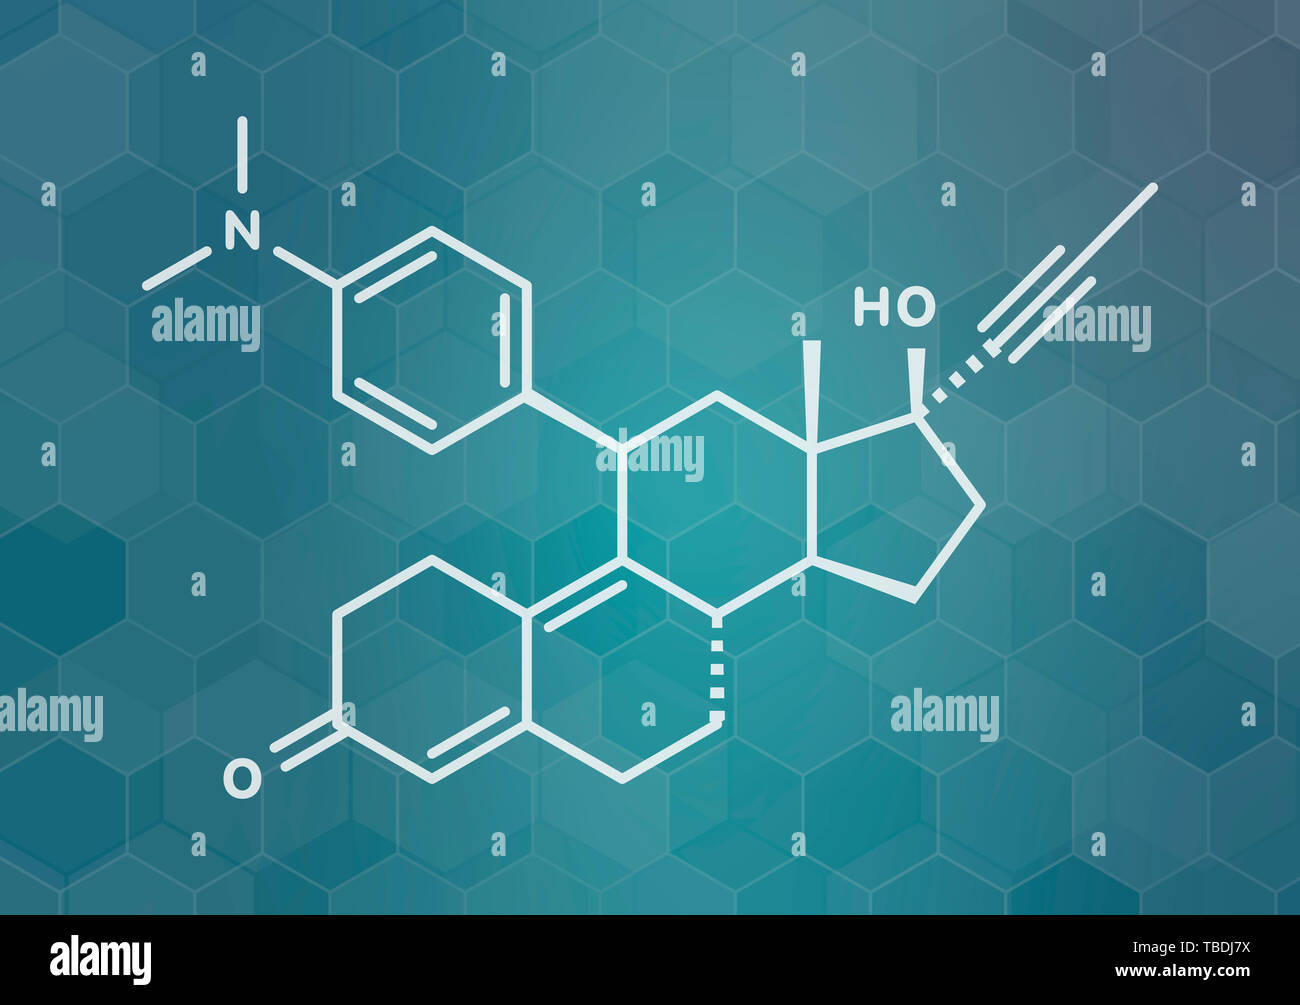 Mifepristone abortion-inducing drug molecule. Also used as emergency contraceptive agent. White skeletal formula on dark teal gradient background with hexagonal pattern. Stock Photo